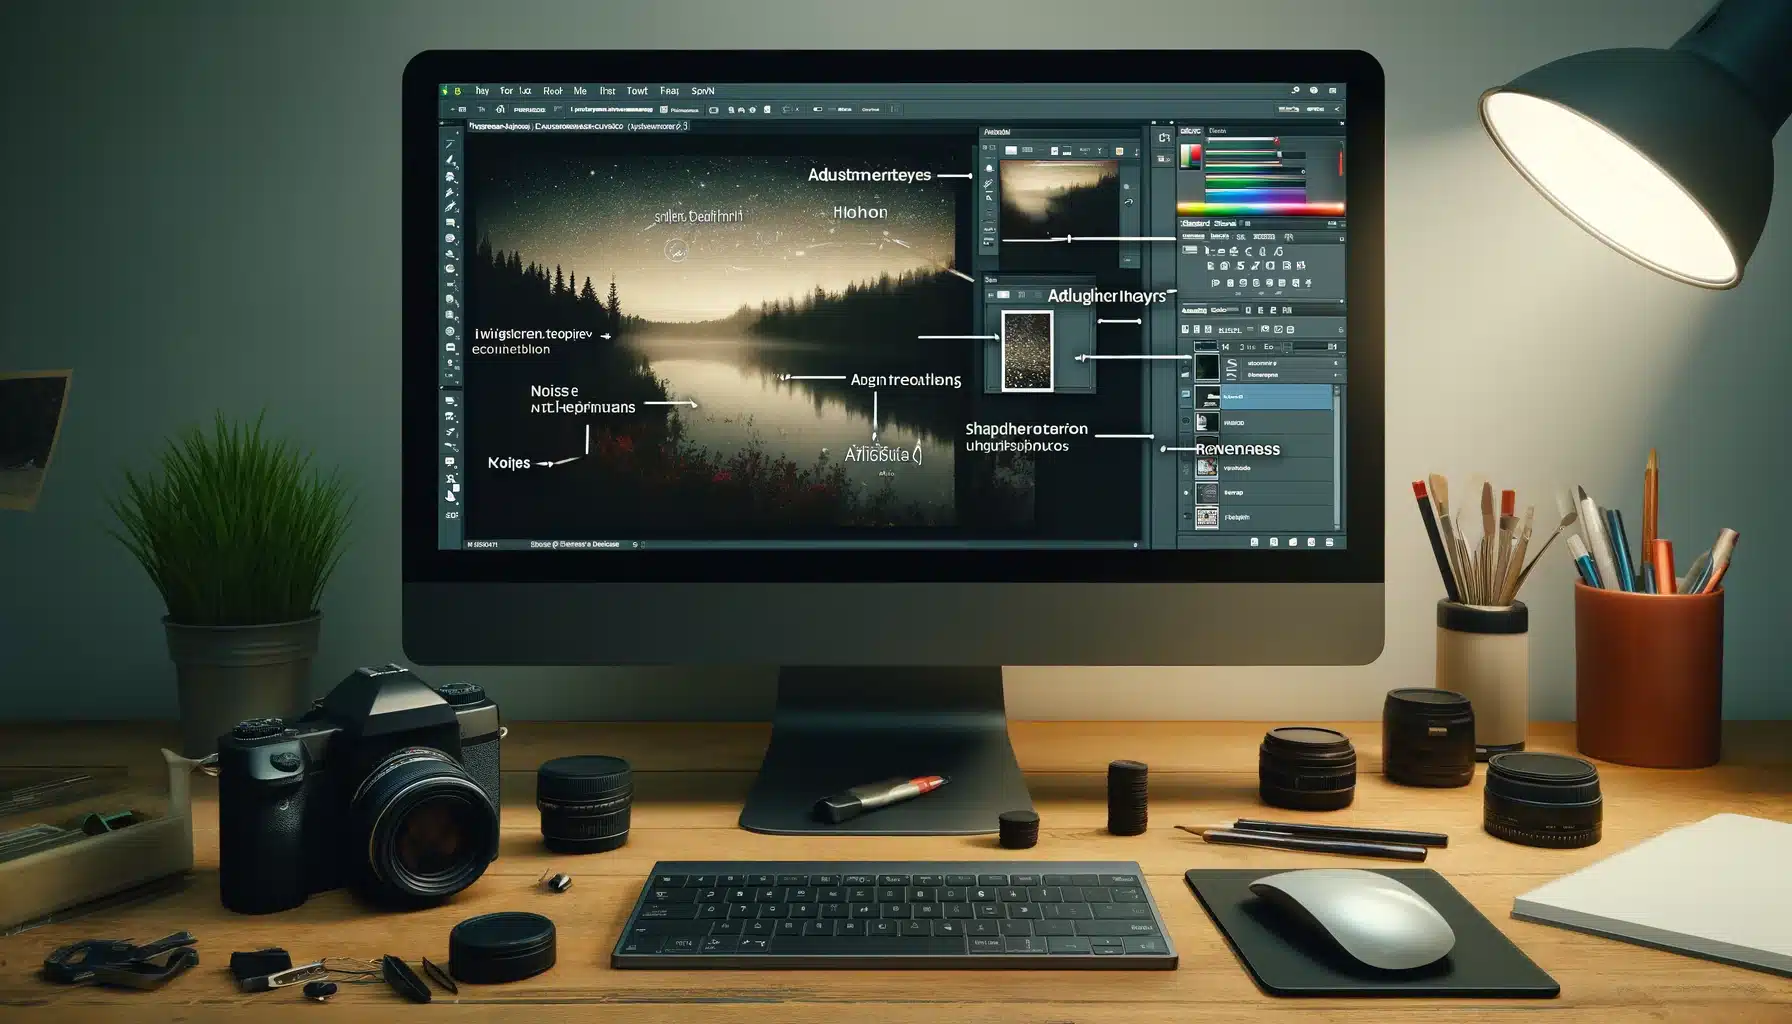 A detailed guide showing the process of fixing grainy photos in Photoshop, with a computer screen displaying the editing workflow and surrounded by photography equipment.